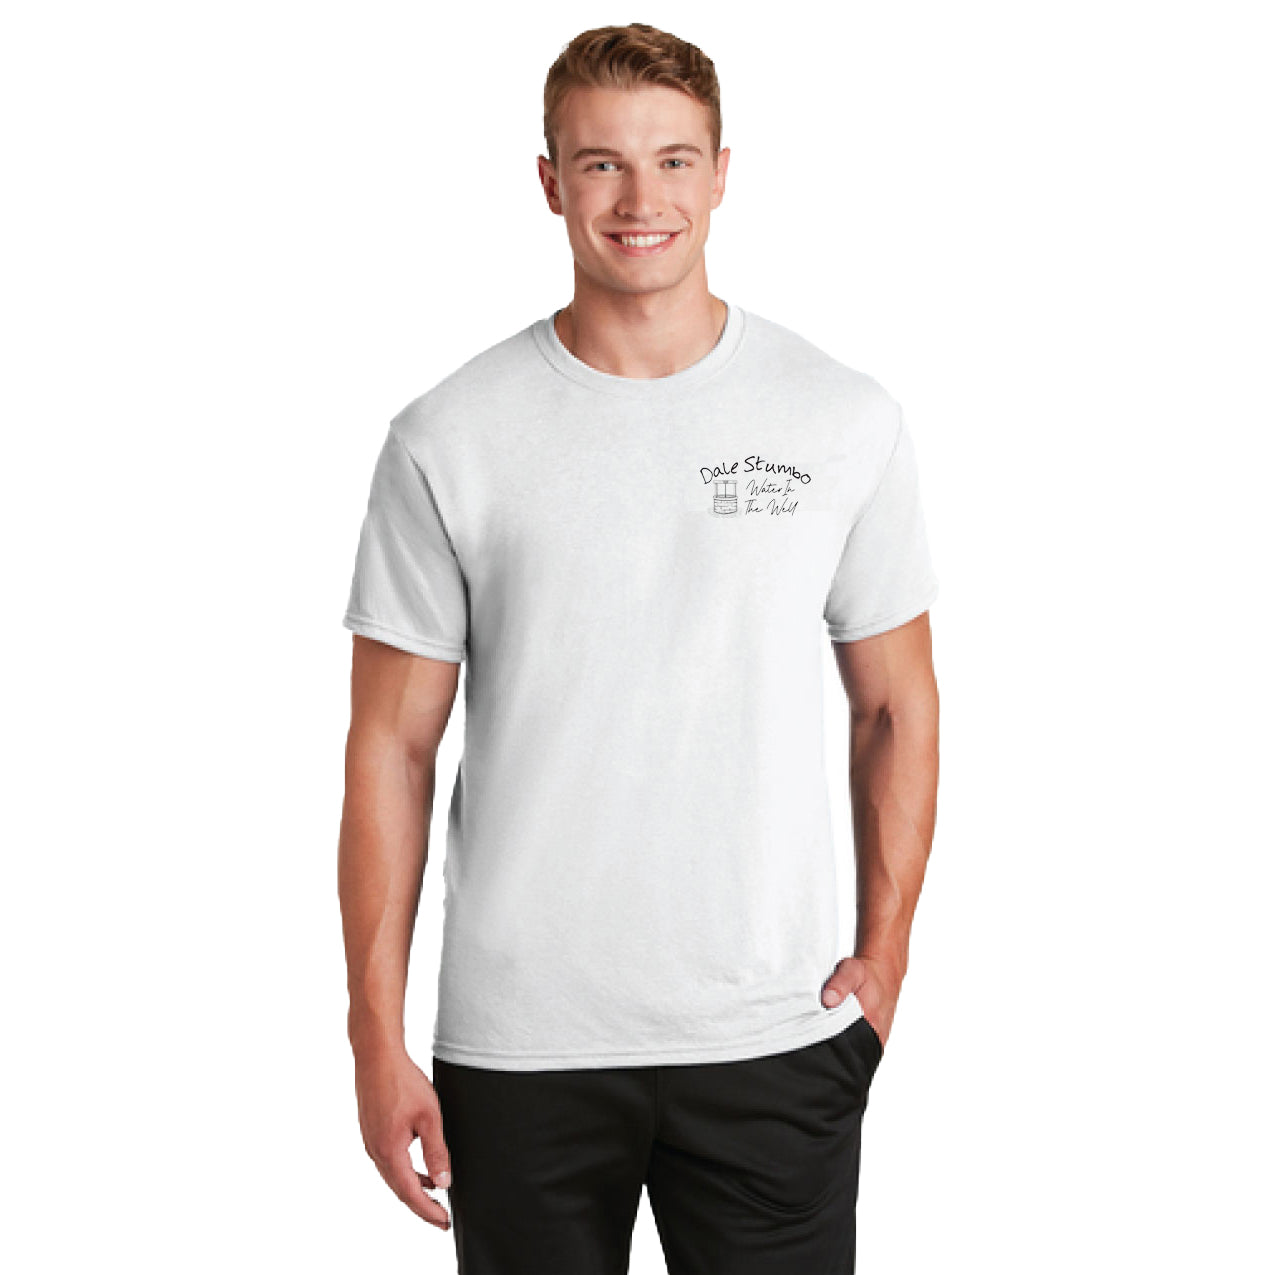 Water In The Well short sleeve tshirt